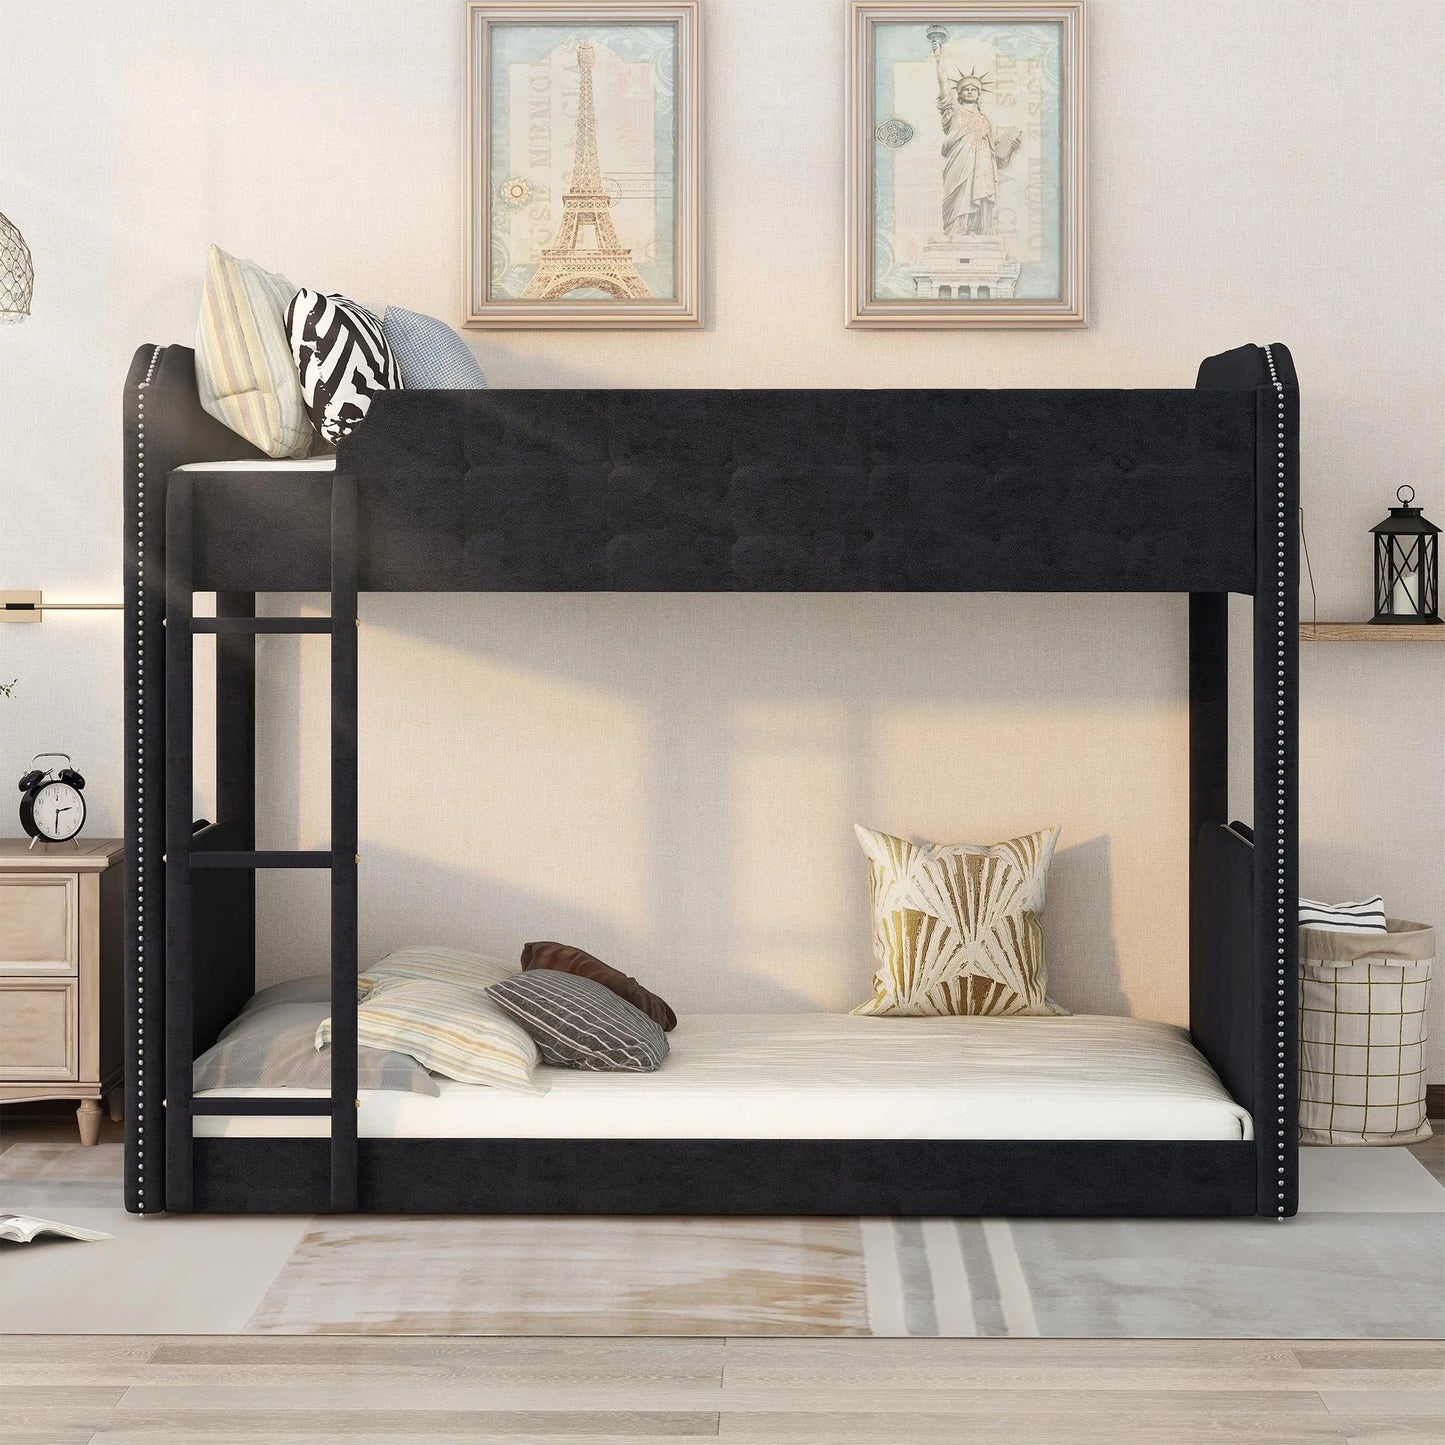 Bed Button Tufted Headboard and Footboard Design in Black